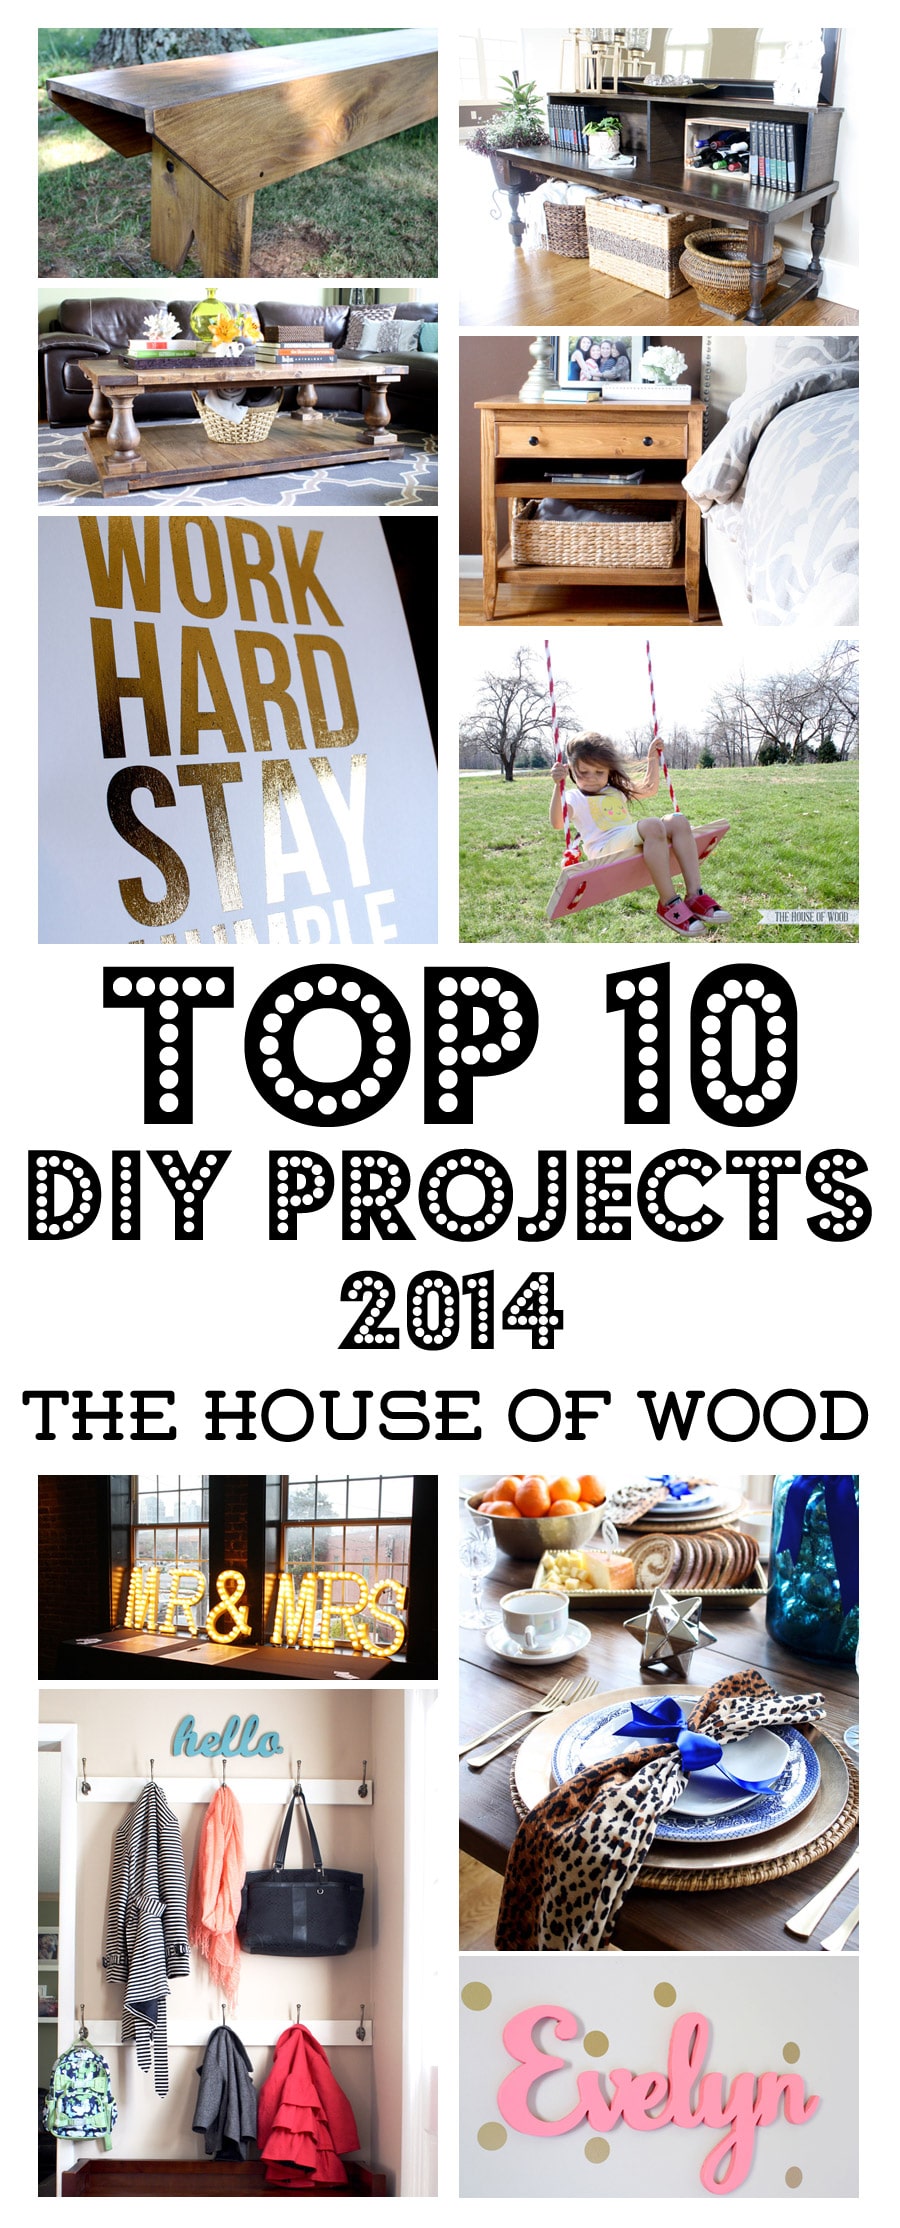 Awesome roundup of the top 10 DIY projects of 2014 from The House of Wood | www.jenwoodhouse.com/blog